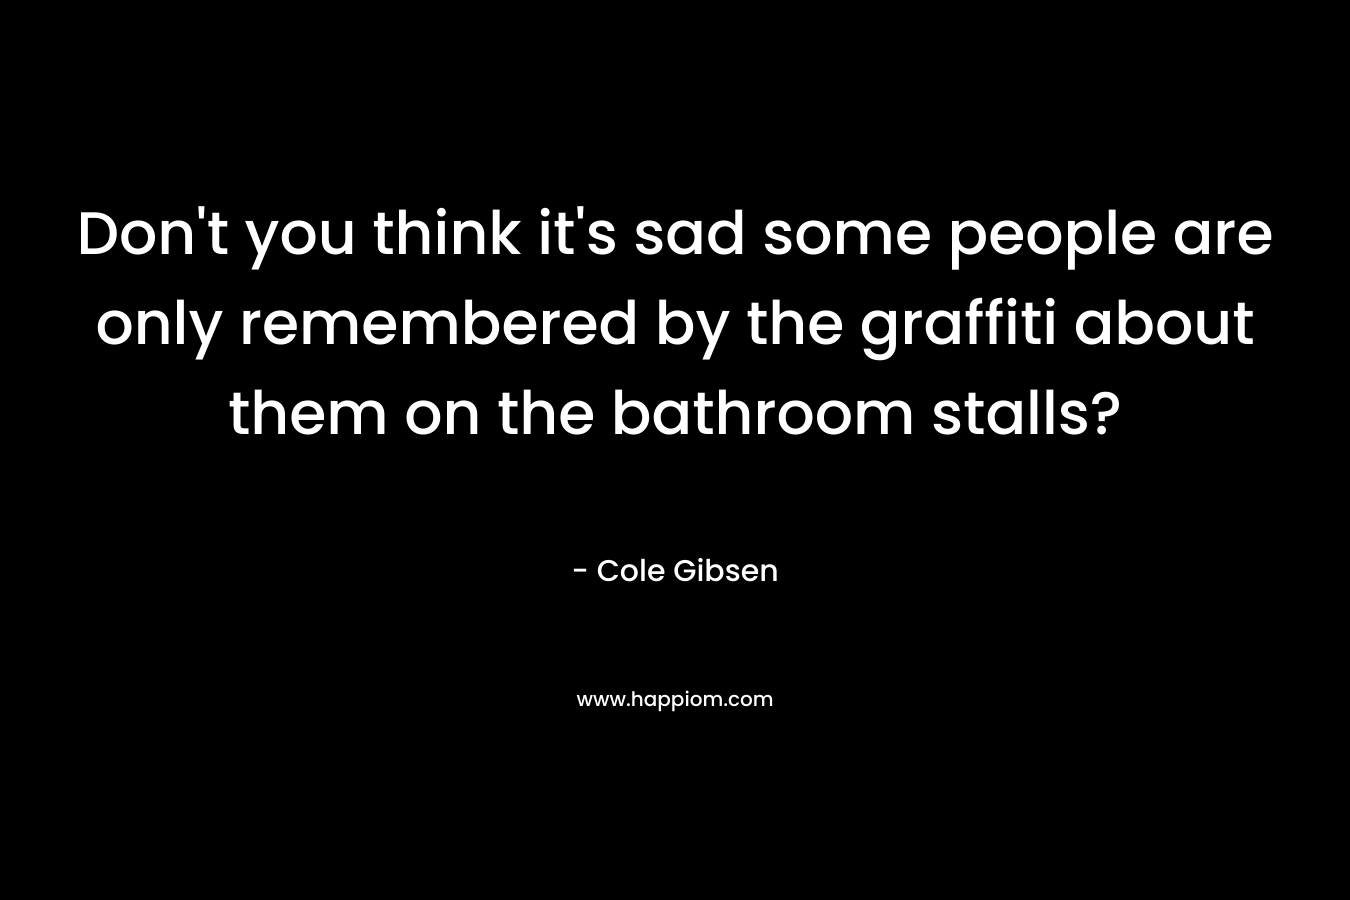 Don’t you think it’s sad some people are only remembered by the graffiti about them on the bathroom stalls? – Cole Gibsen